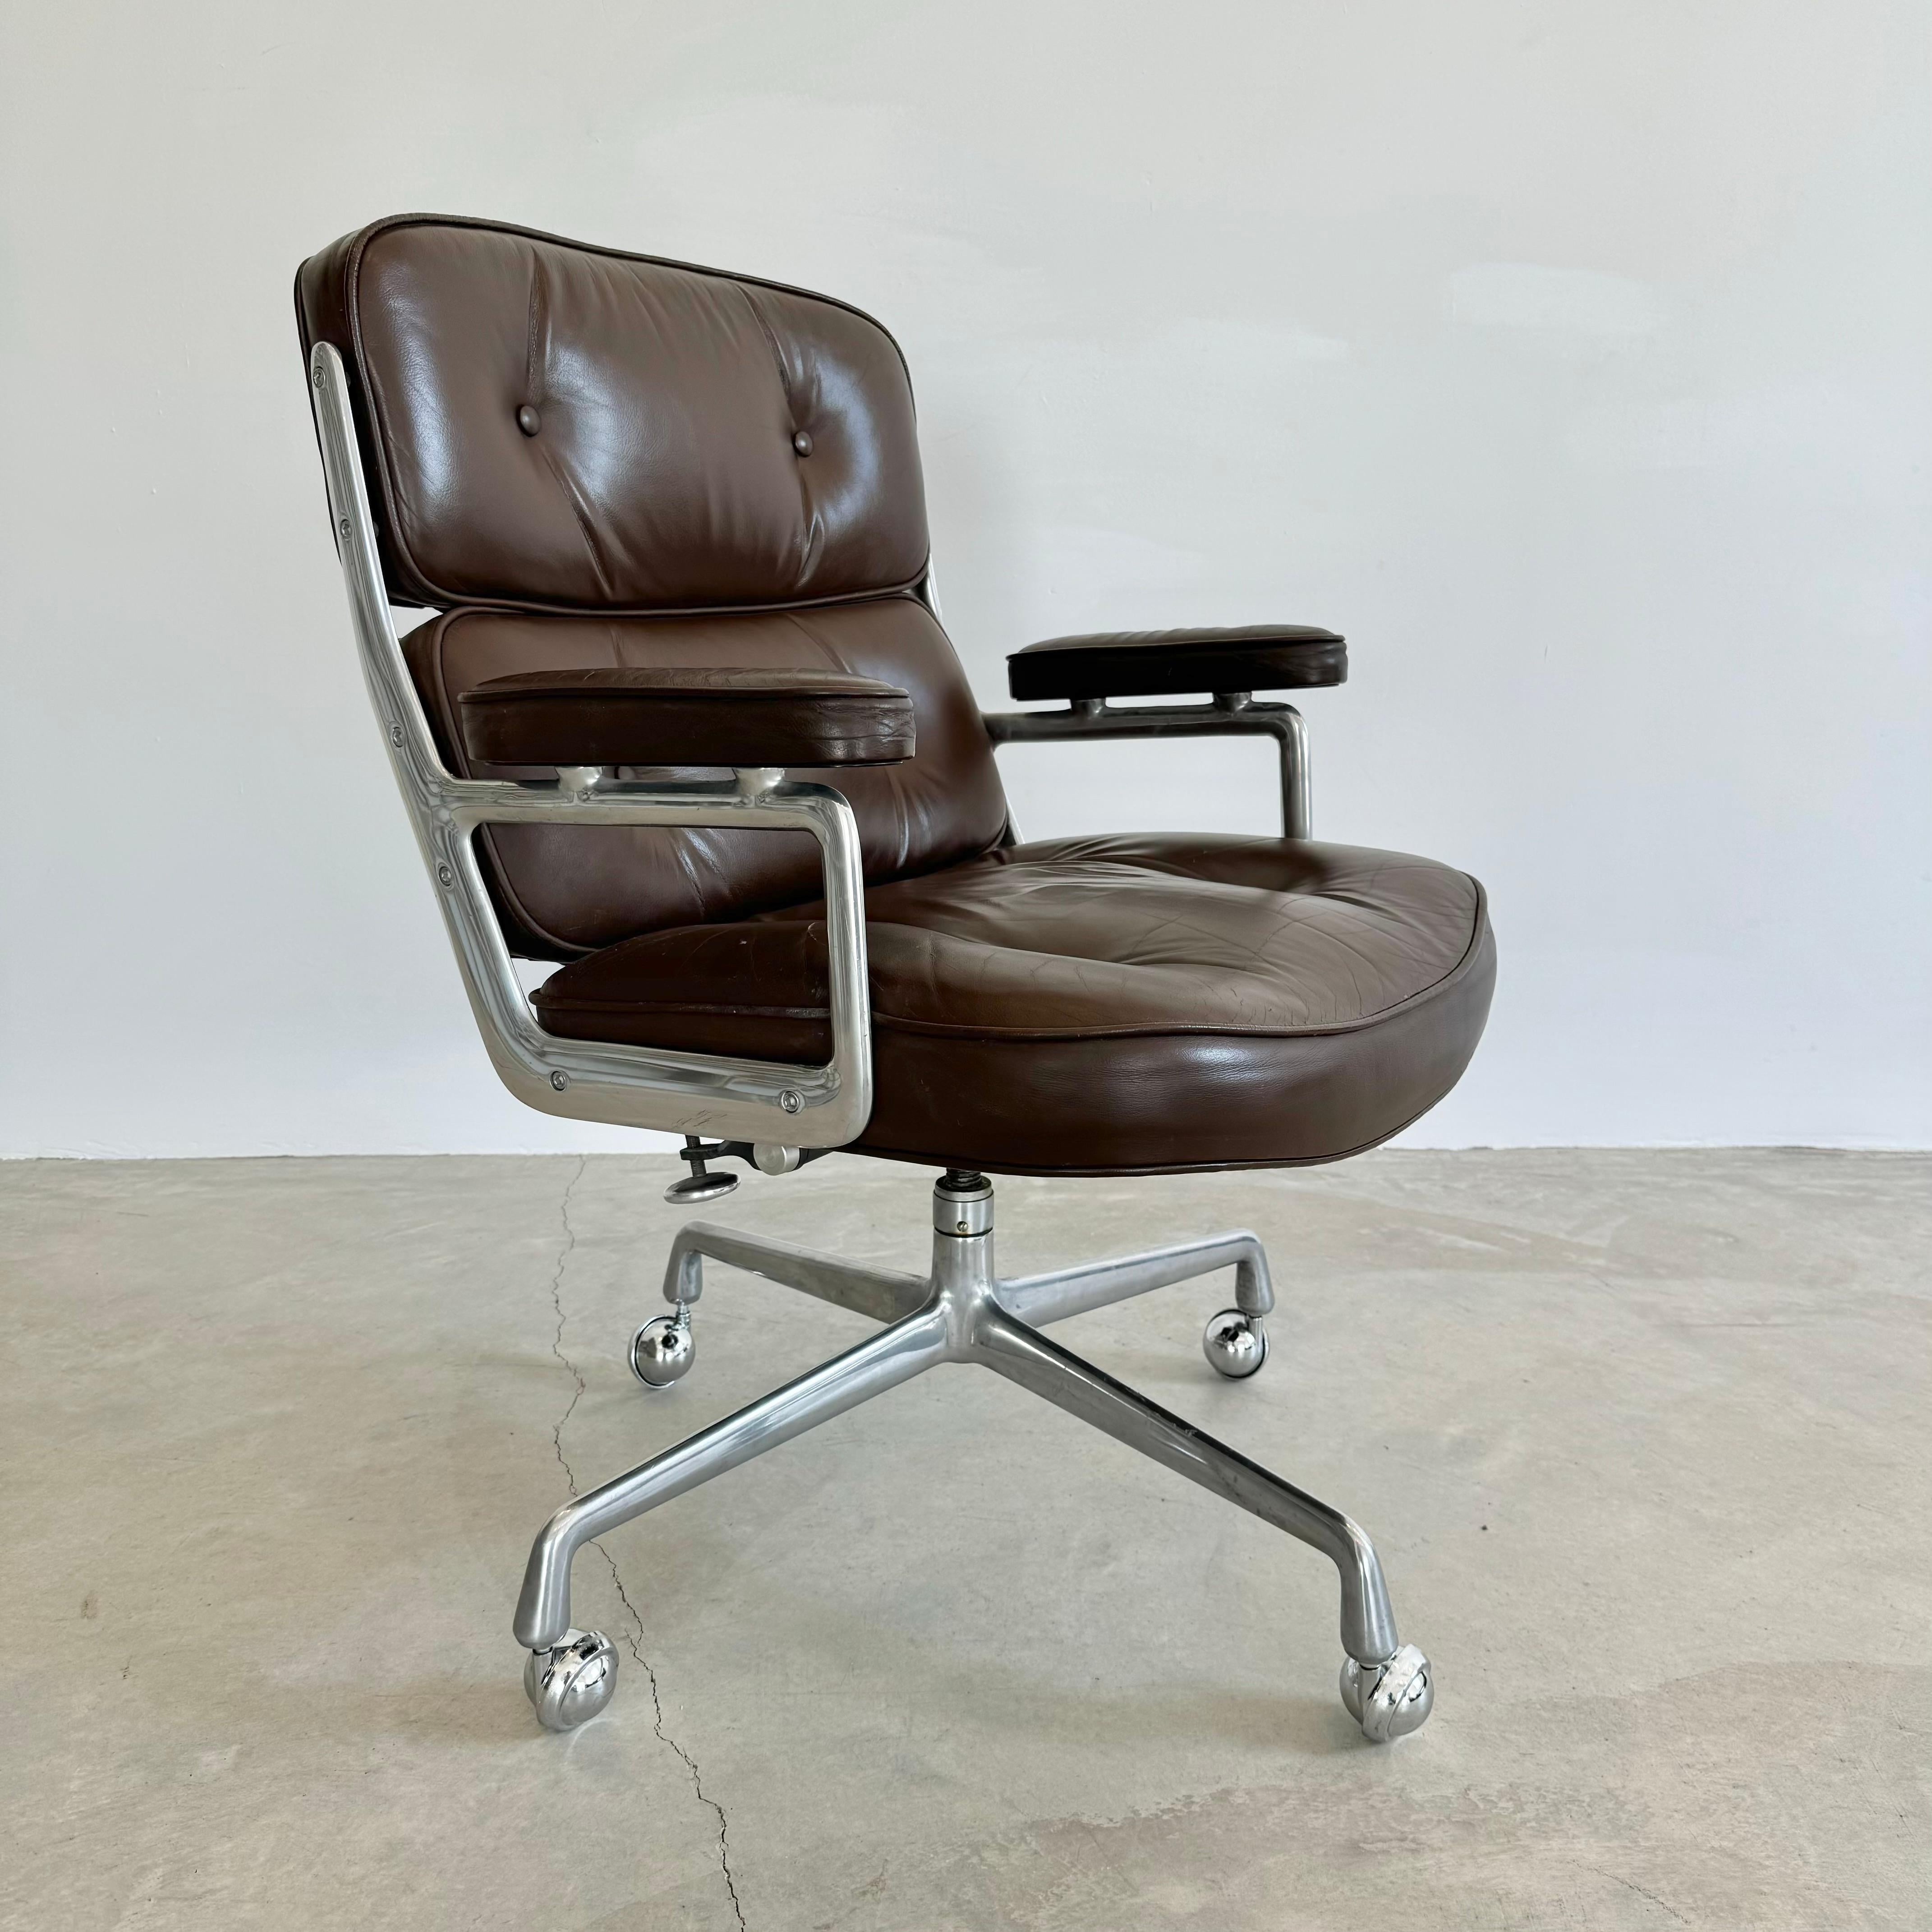 Eames Time Life Chair in Chocolate Leather for Herman Miller, 1978 USA For Sale 7